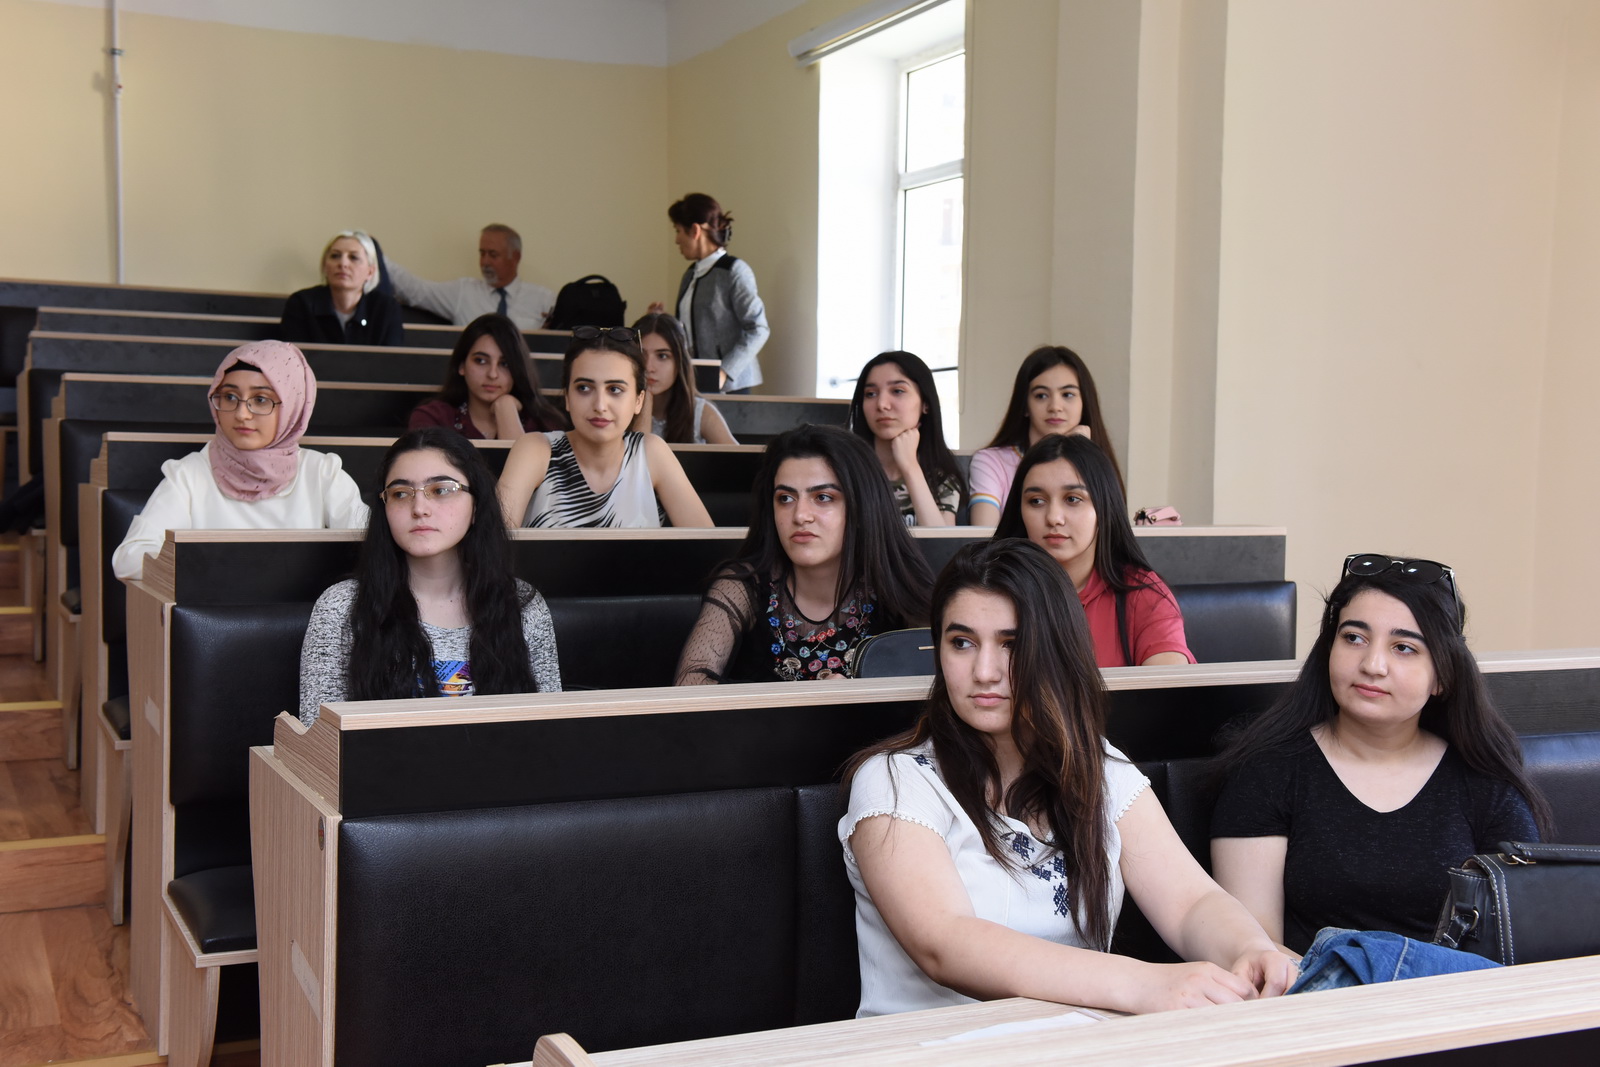 Employees of the University of Ankara visited AUL